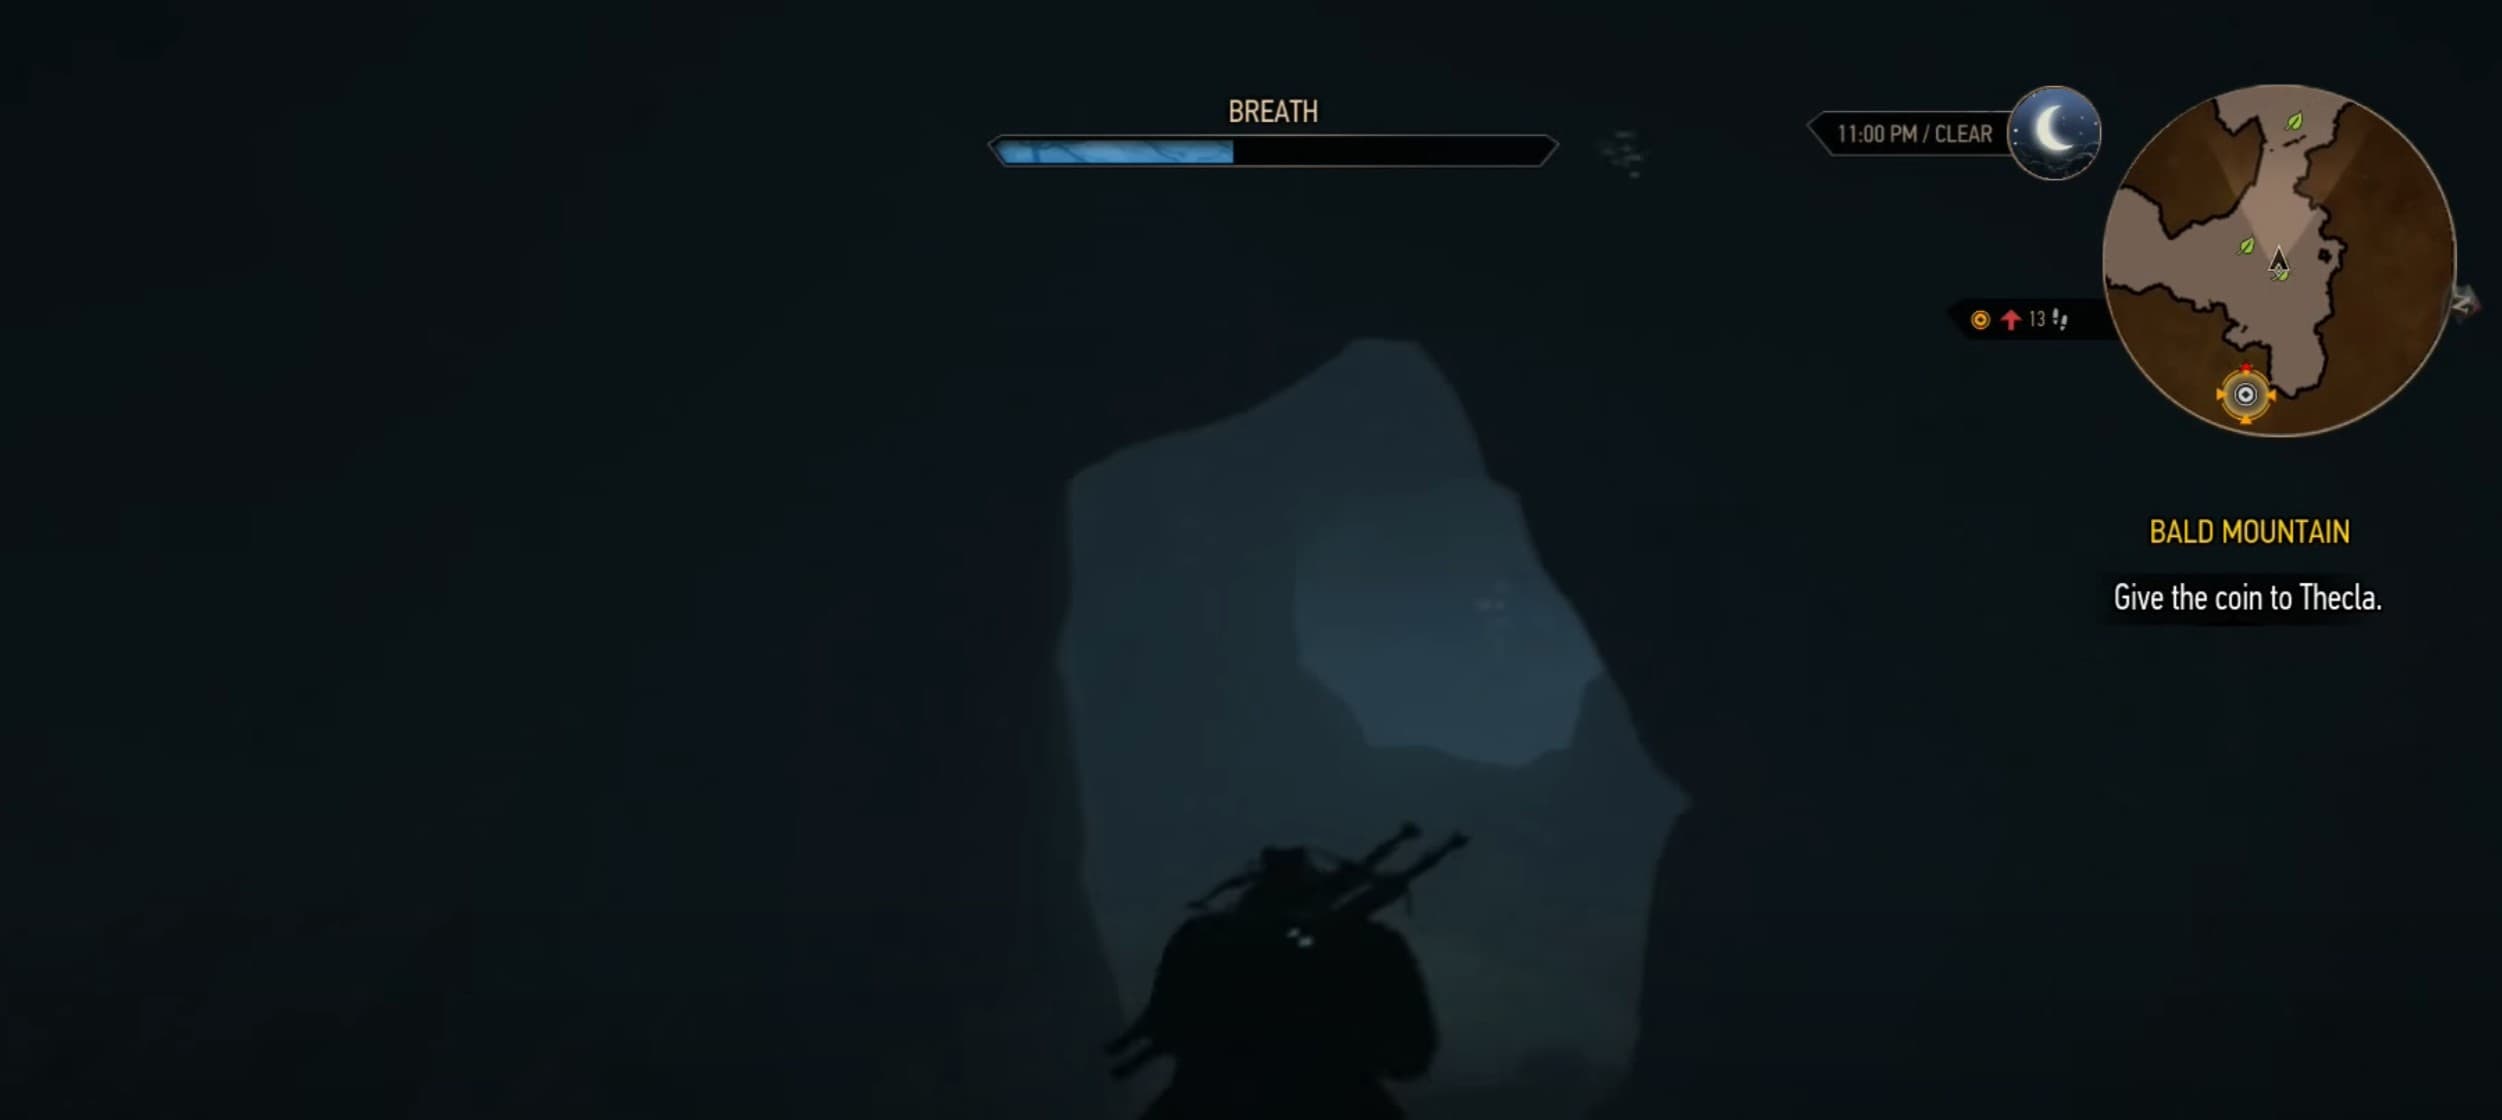 The Witcher 3 Bald Mountain coin cave